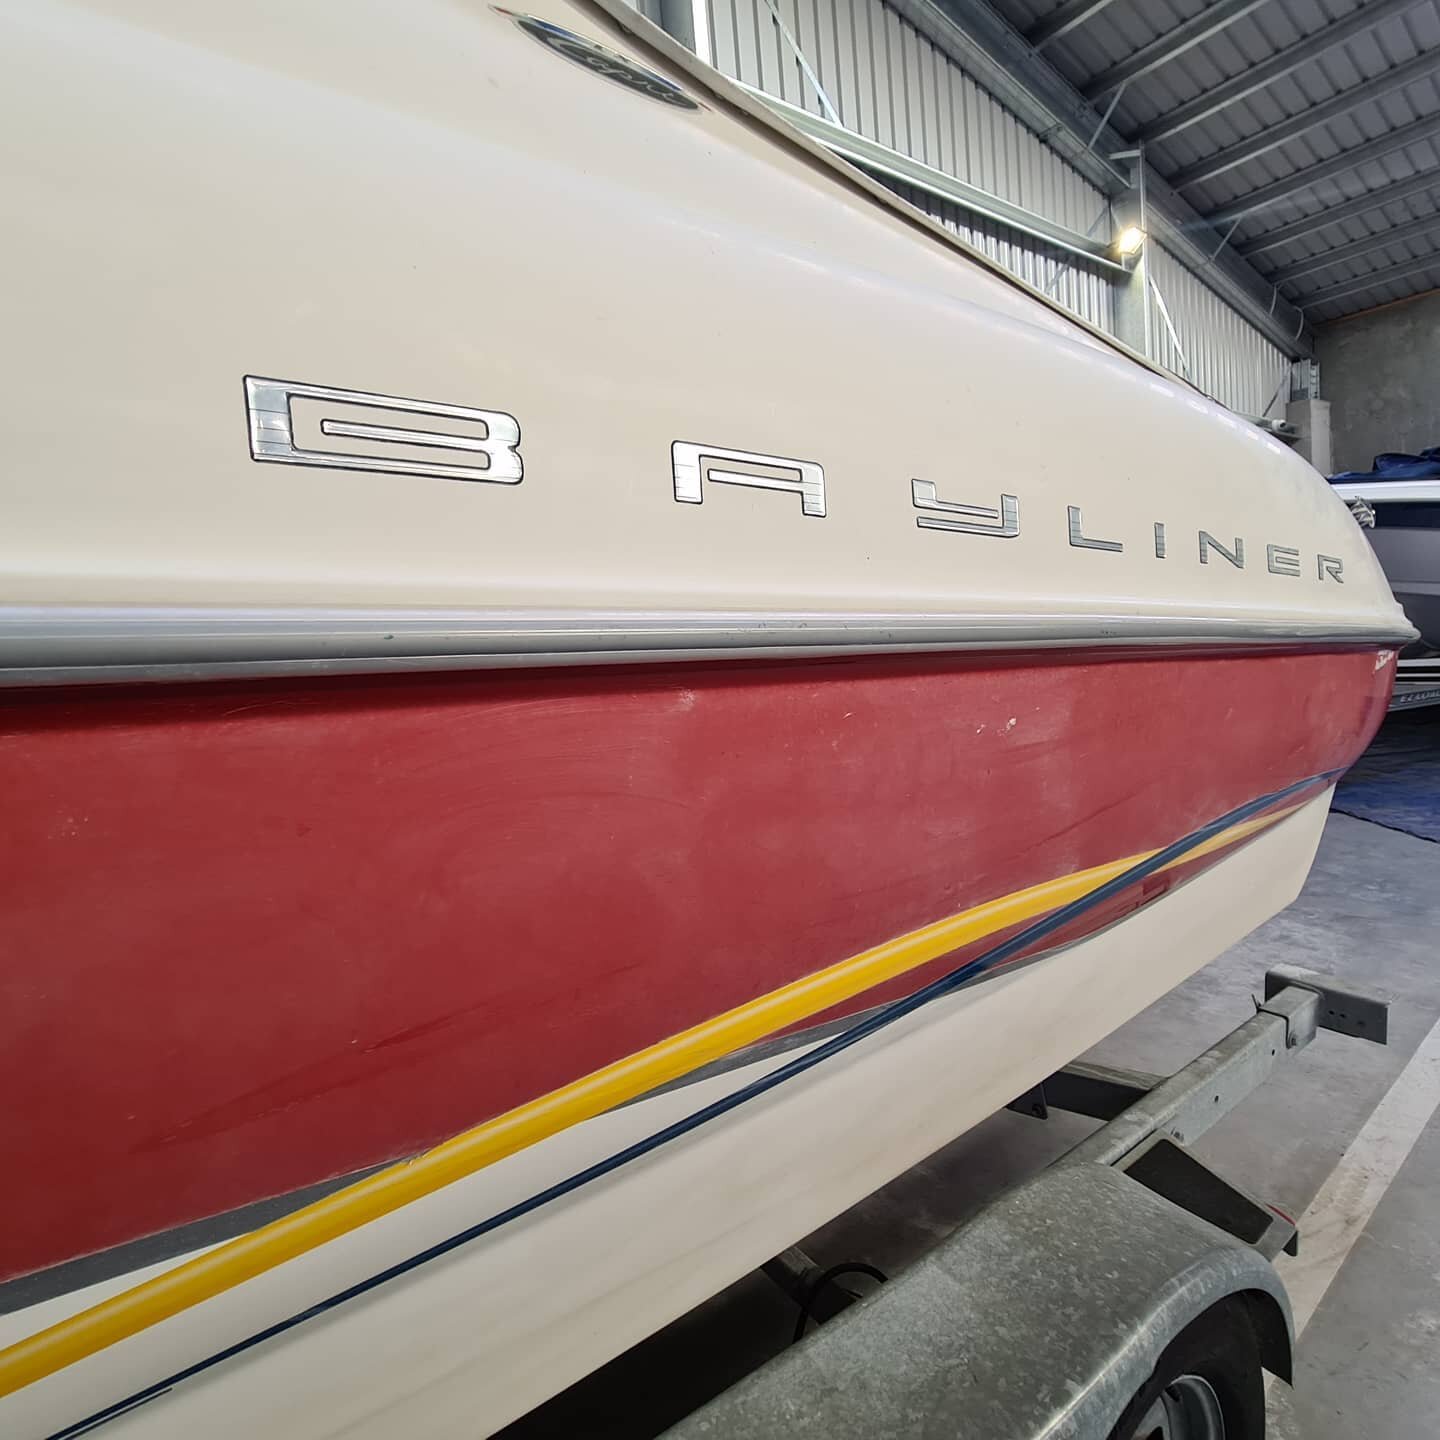 Our polishing skills are not just reserved for paint. Gelcoat does however require a different approach as well as marine specific polishing gels and pastes. 

Over the last decade of shining boats in Wanaka we have perfected the process and are one 